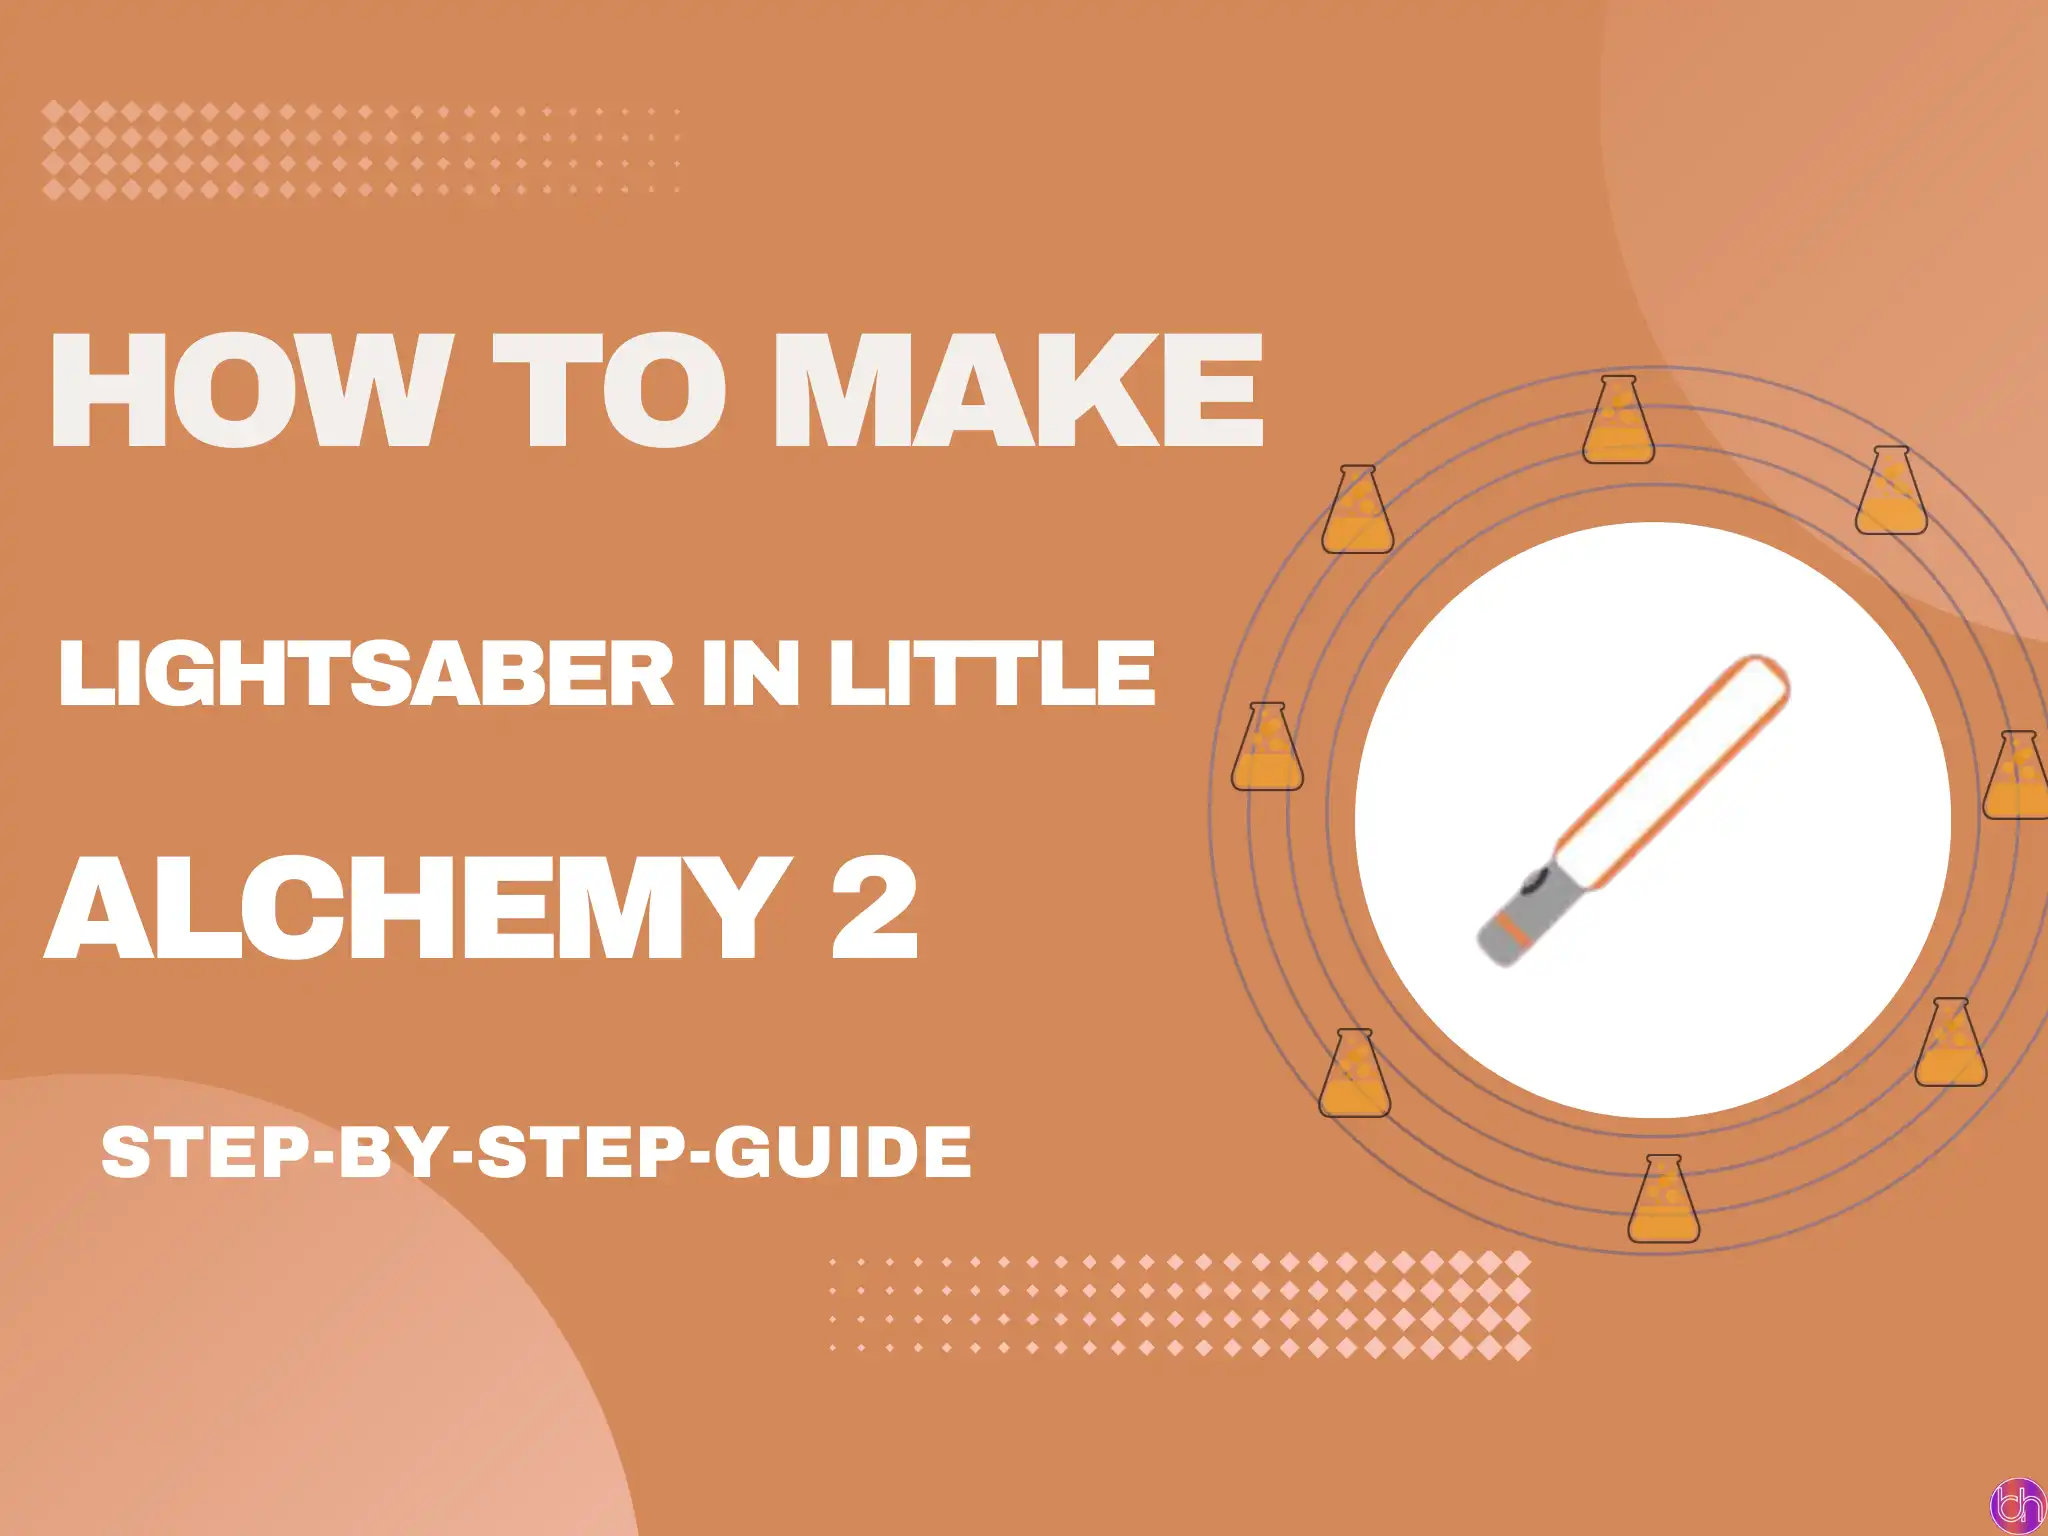 How to make lightsaber in Little Alchemy 2